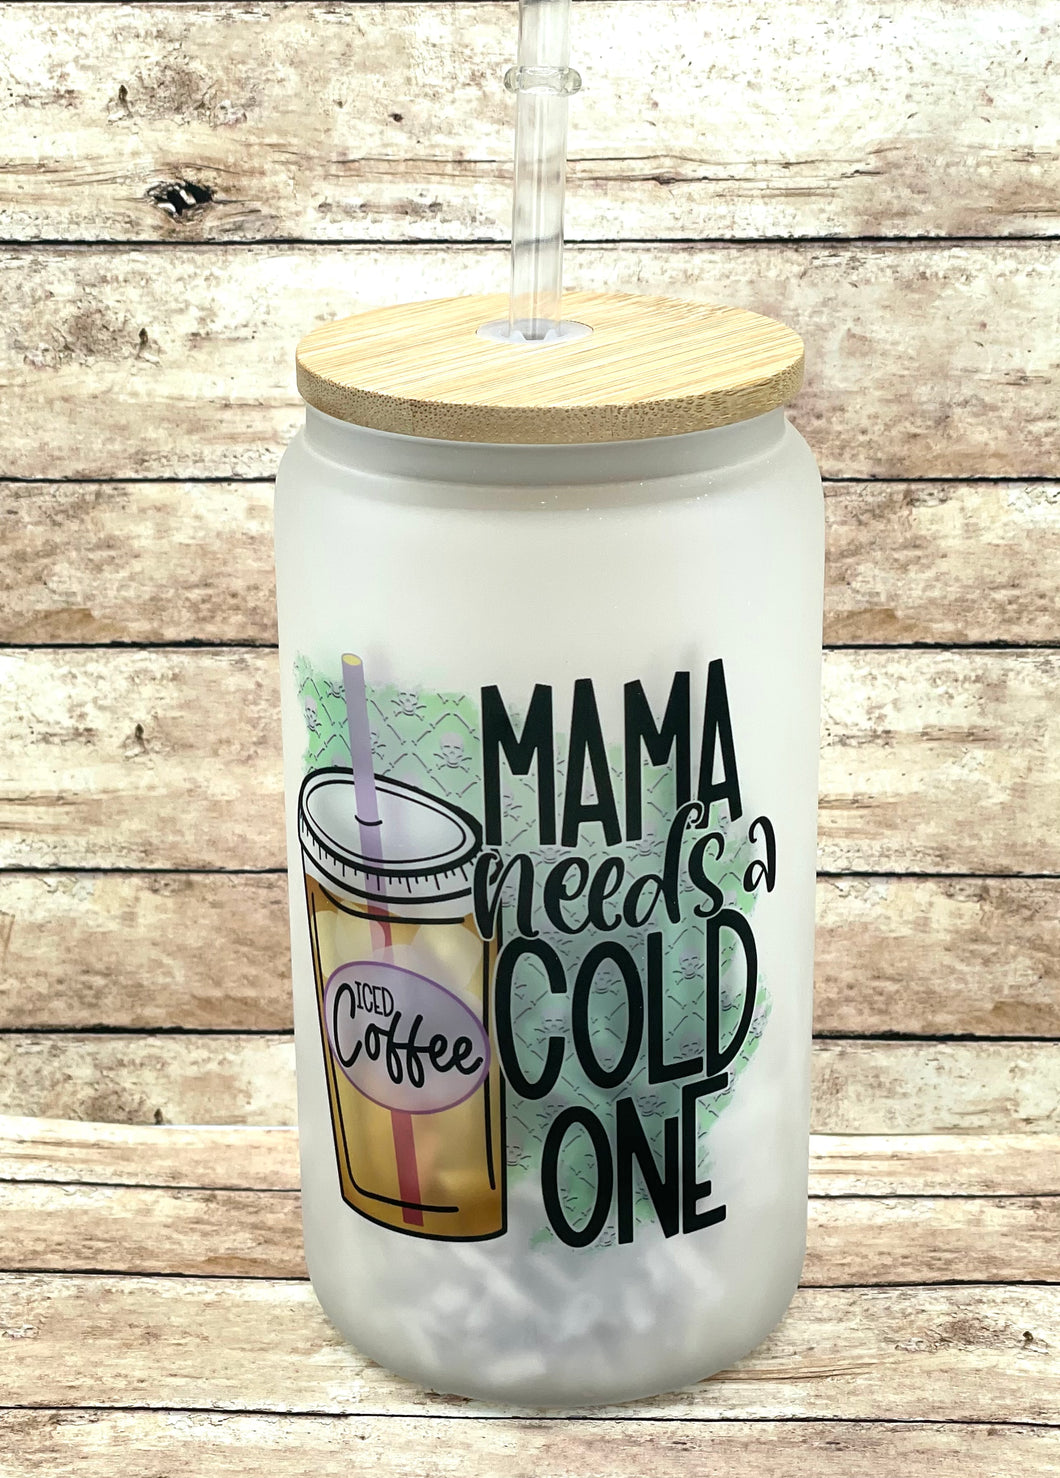 Mama Needs A Cold One Iced Coffee Cup